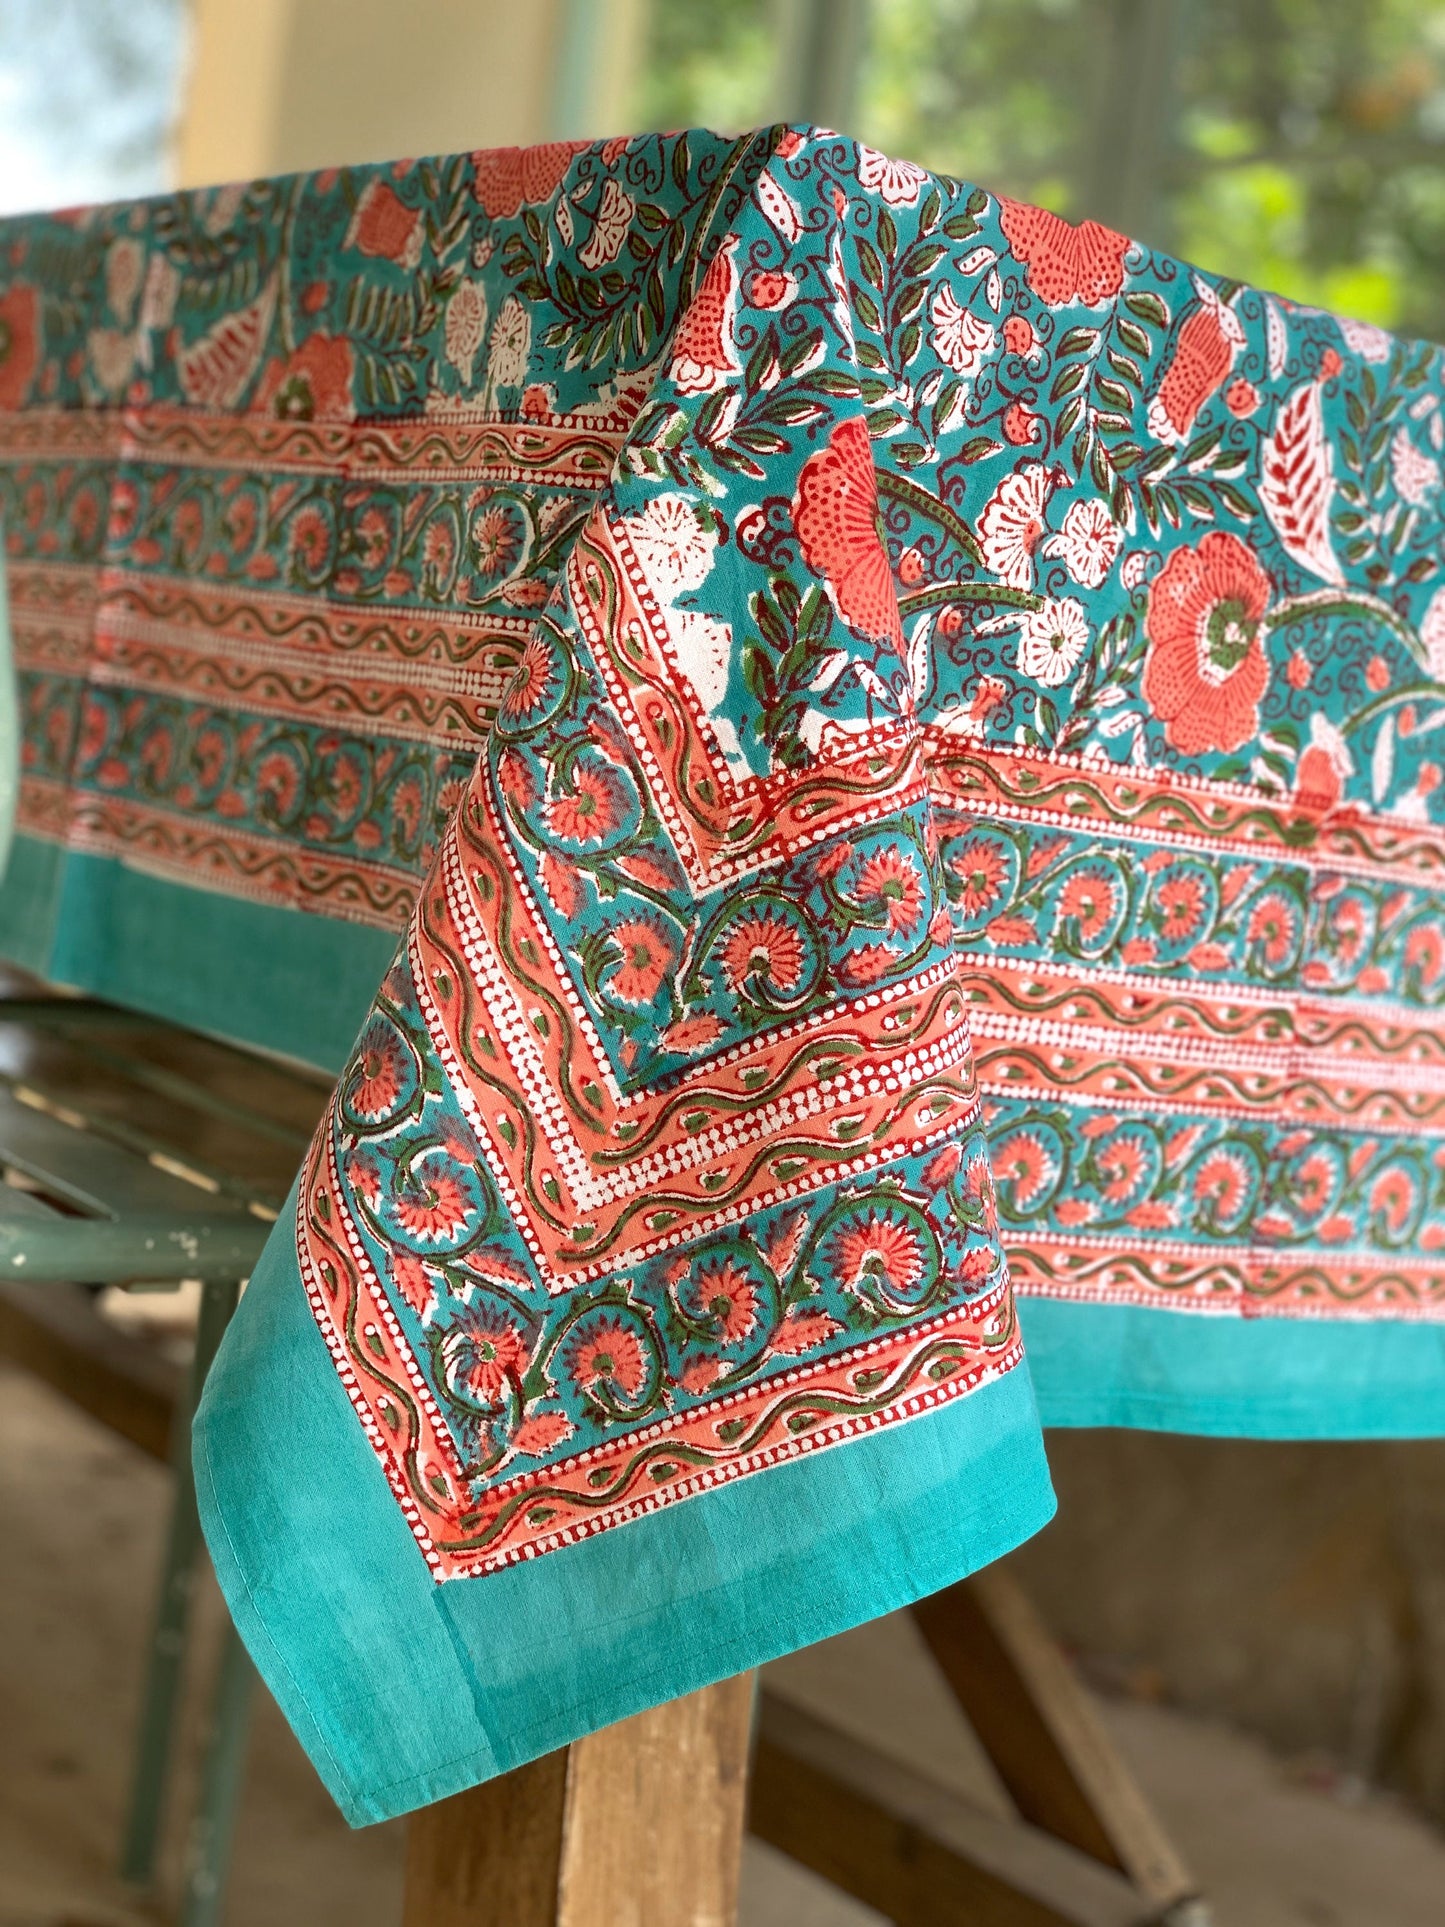 Pure cotton block print tablecloth handmade in India · Square 4 diners · Boho chic tablecloth 100% Indian cotton · Turquoise and coral